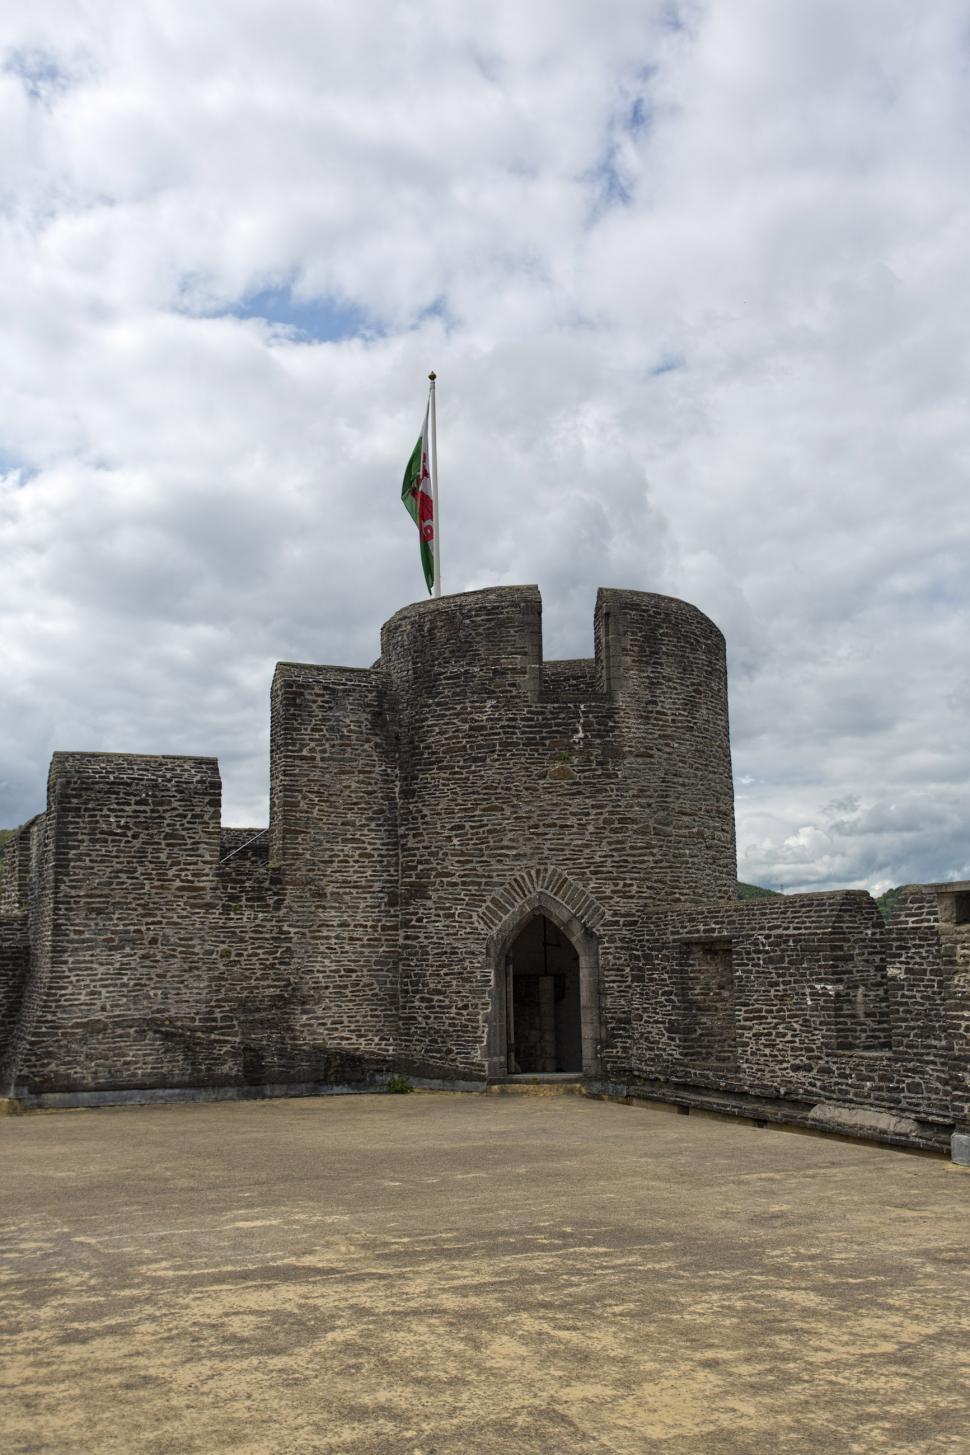 Free Image of Caerphilly castle tower 